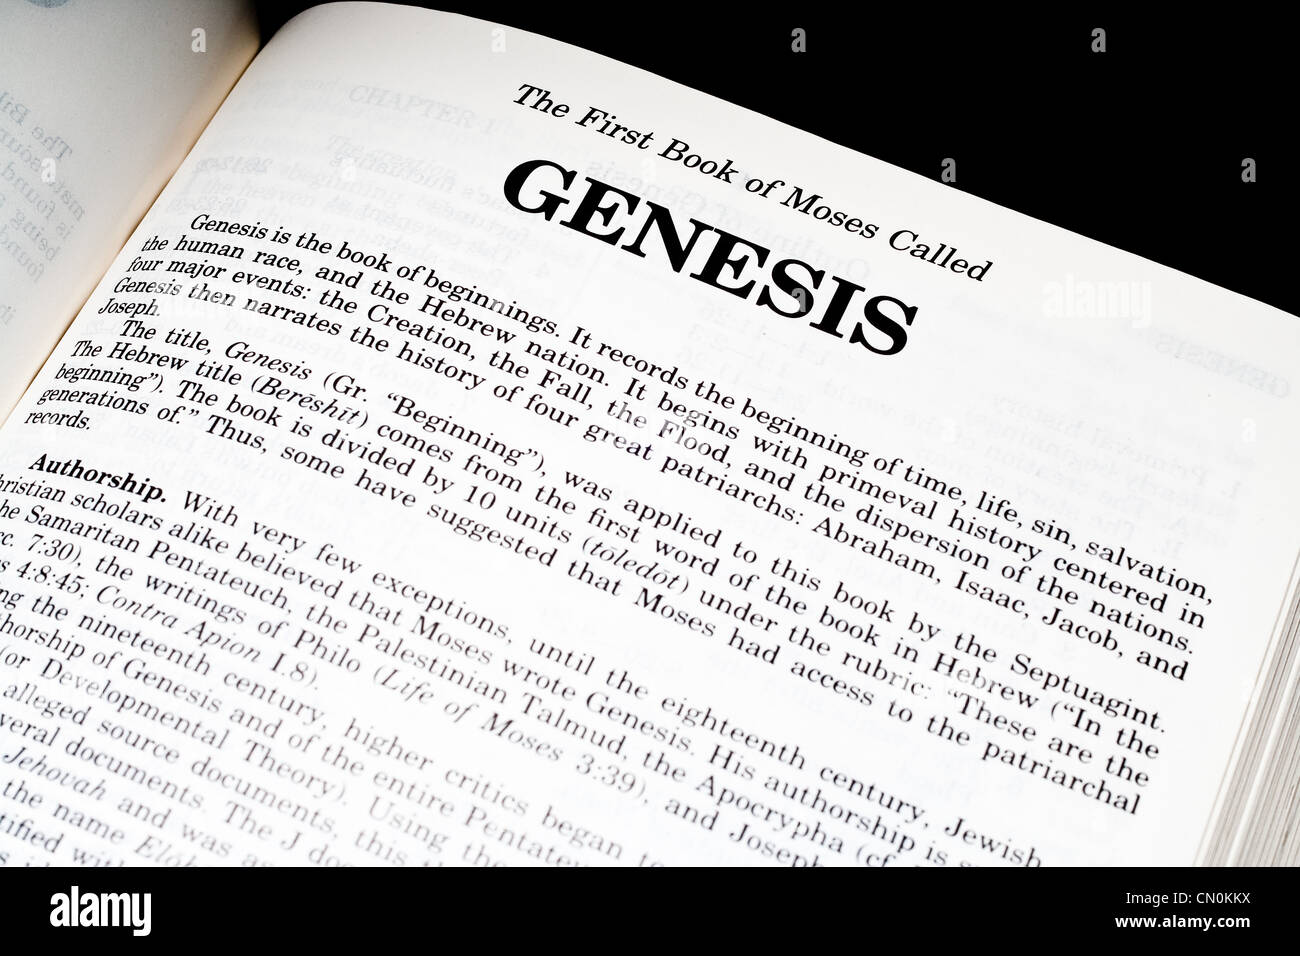 Bible opened up to the book of Genesis Stock Photo